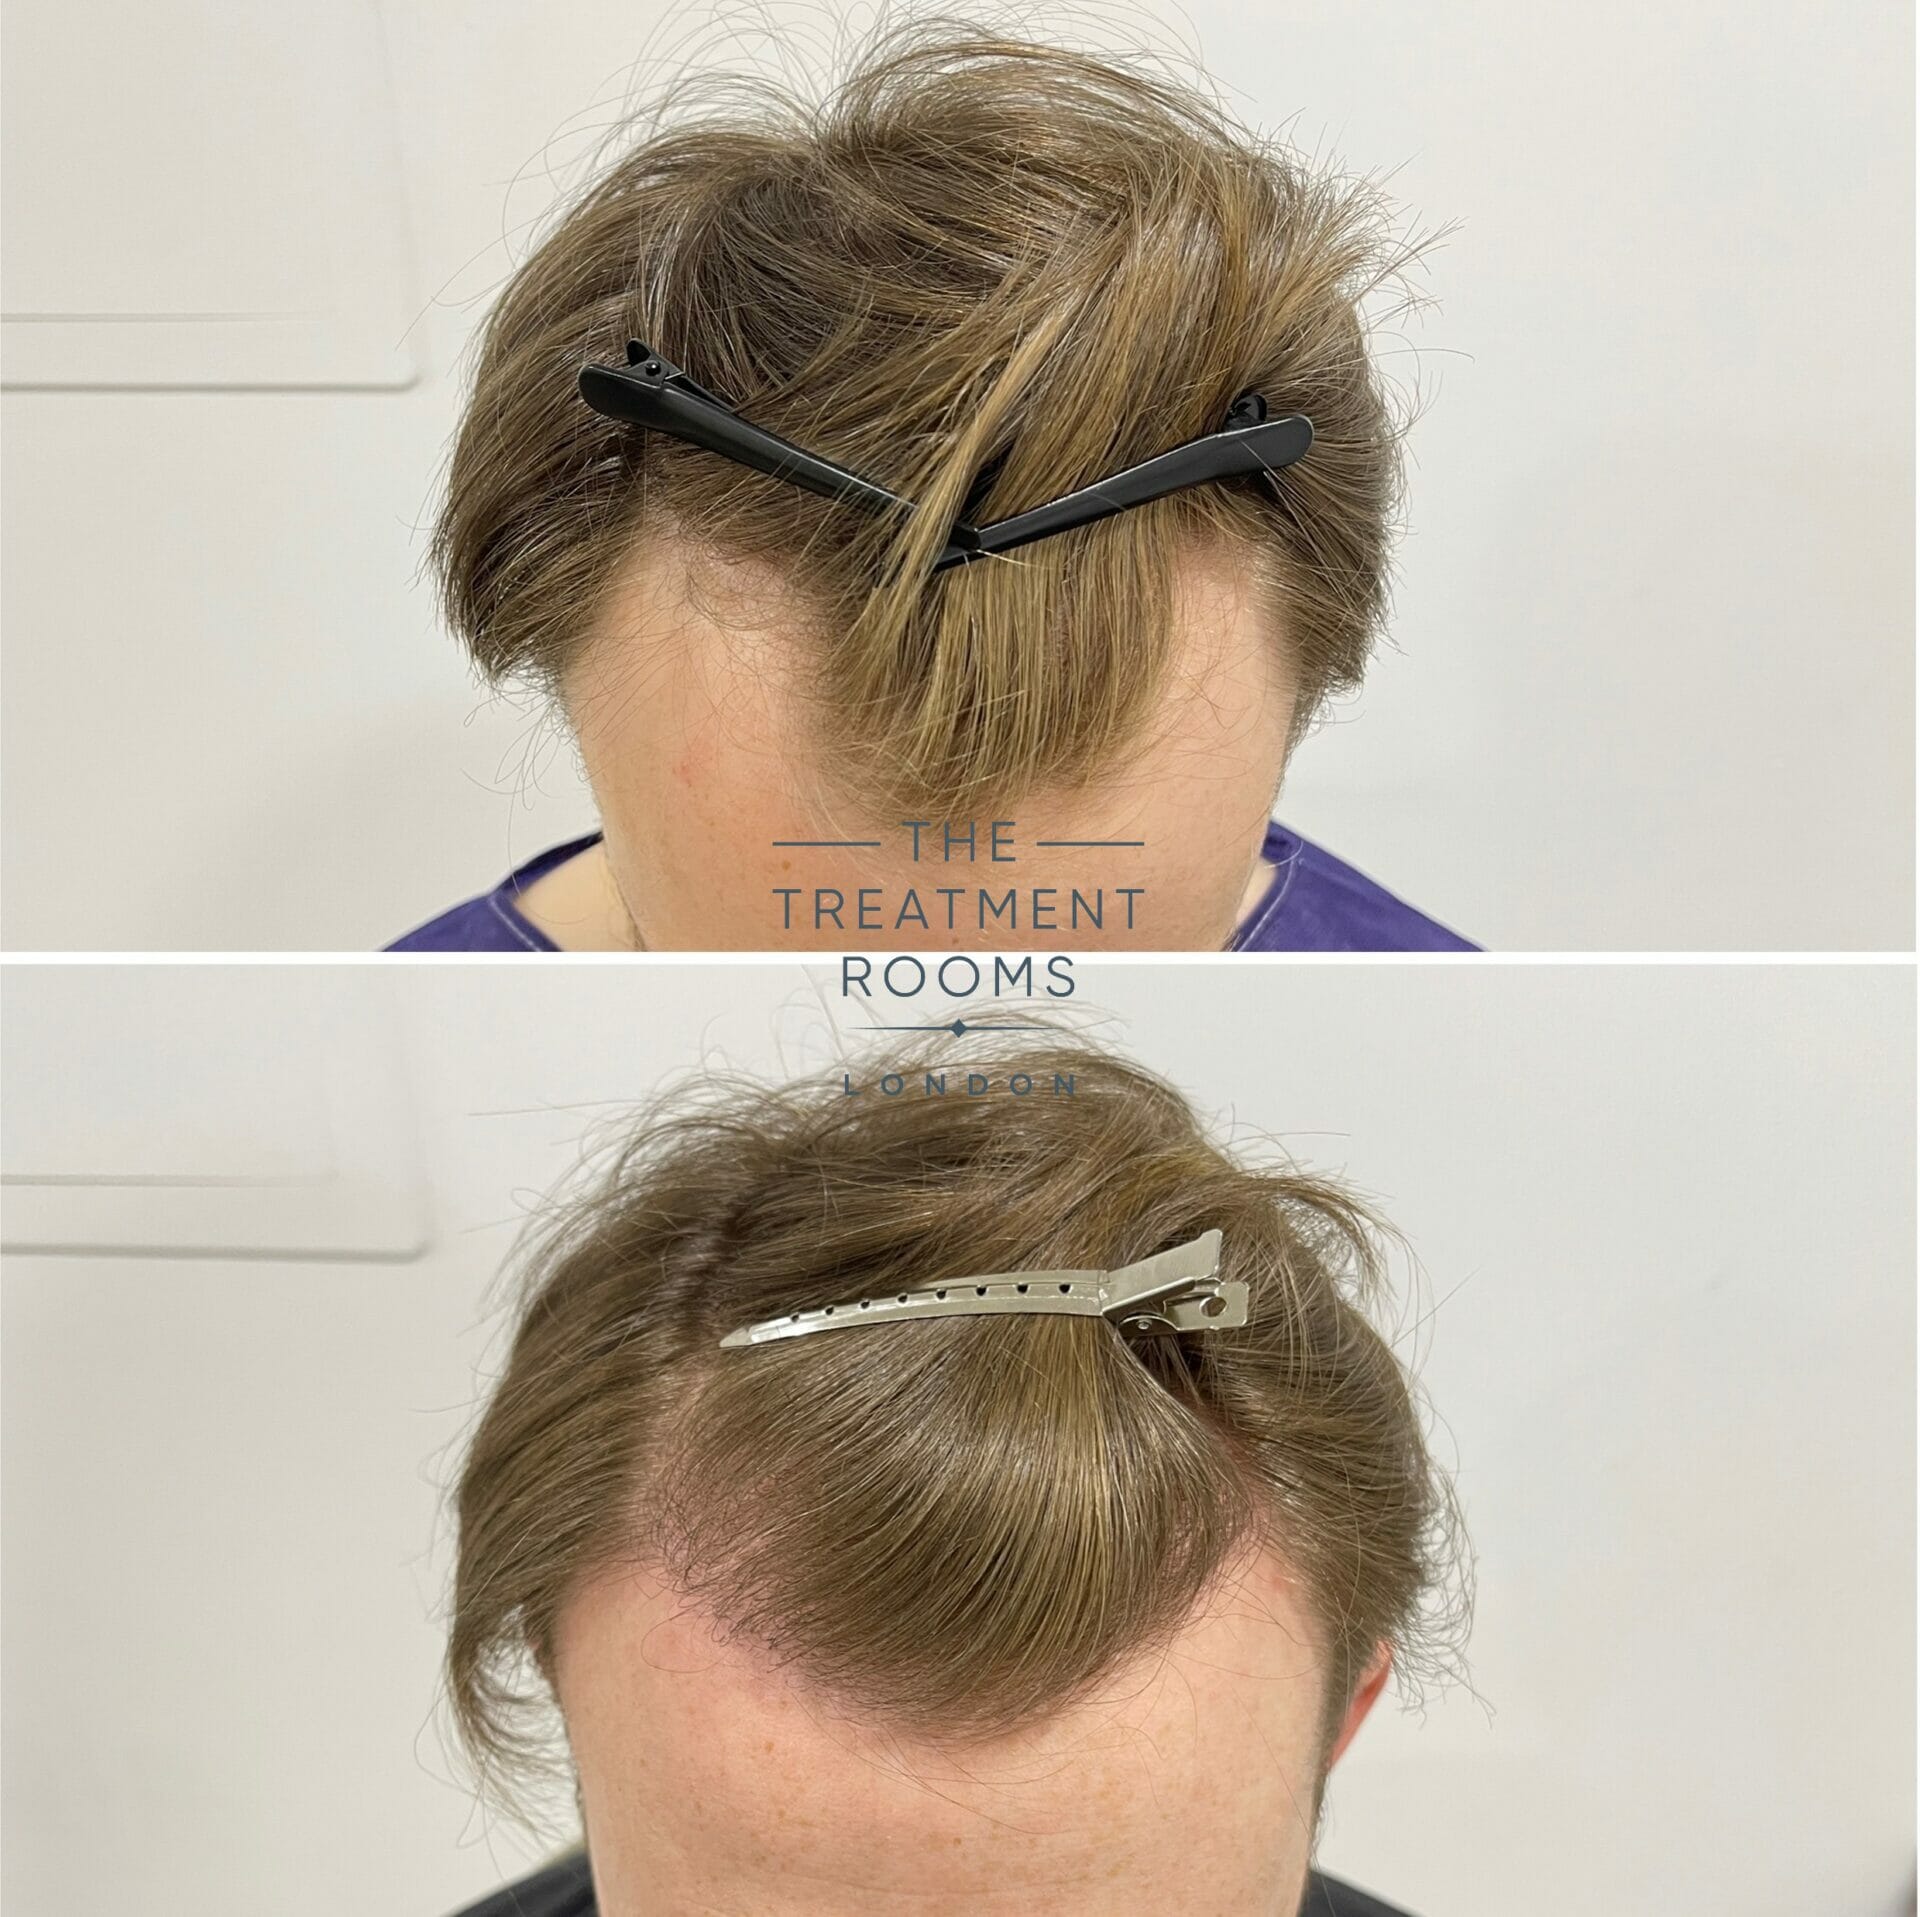 Hair Transplant Before and After 1700 grafts - Treatment Rooms London